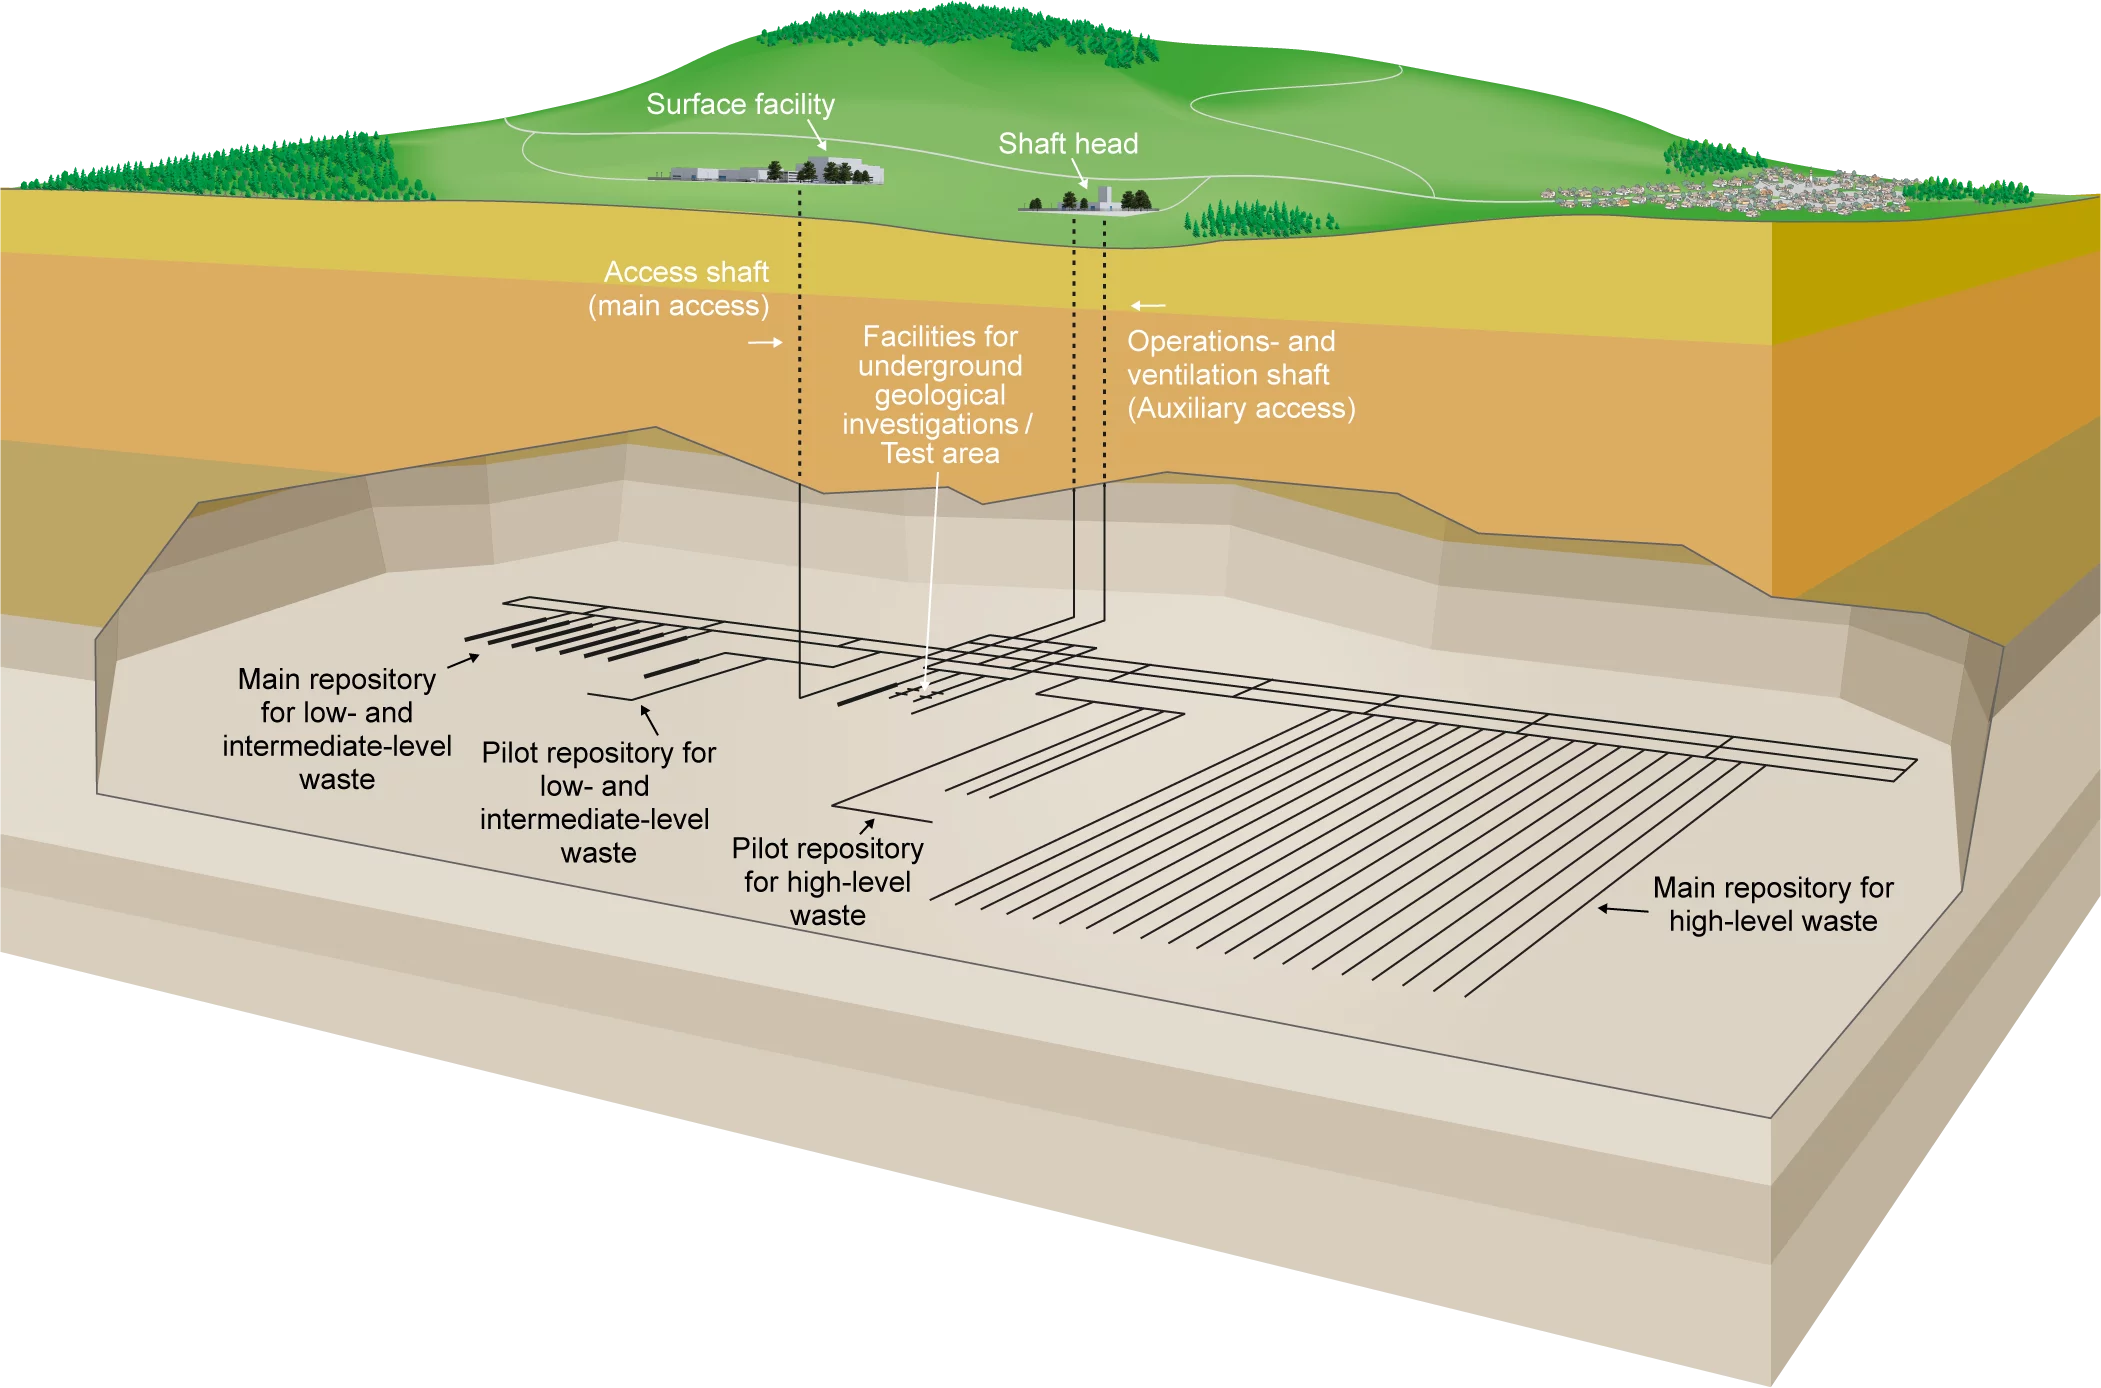 Diagram of a deep geological repository for low- and intermediate-level waste as well as high-level waste (combined repository). In this example, the access structures are designed as shafts. Source: Nagra.